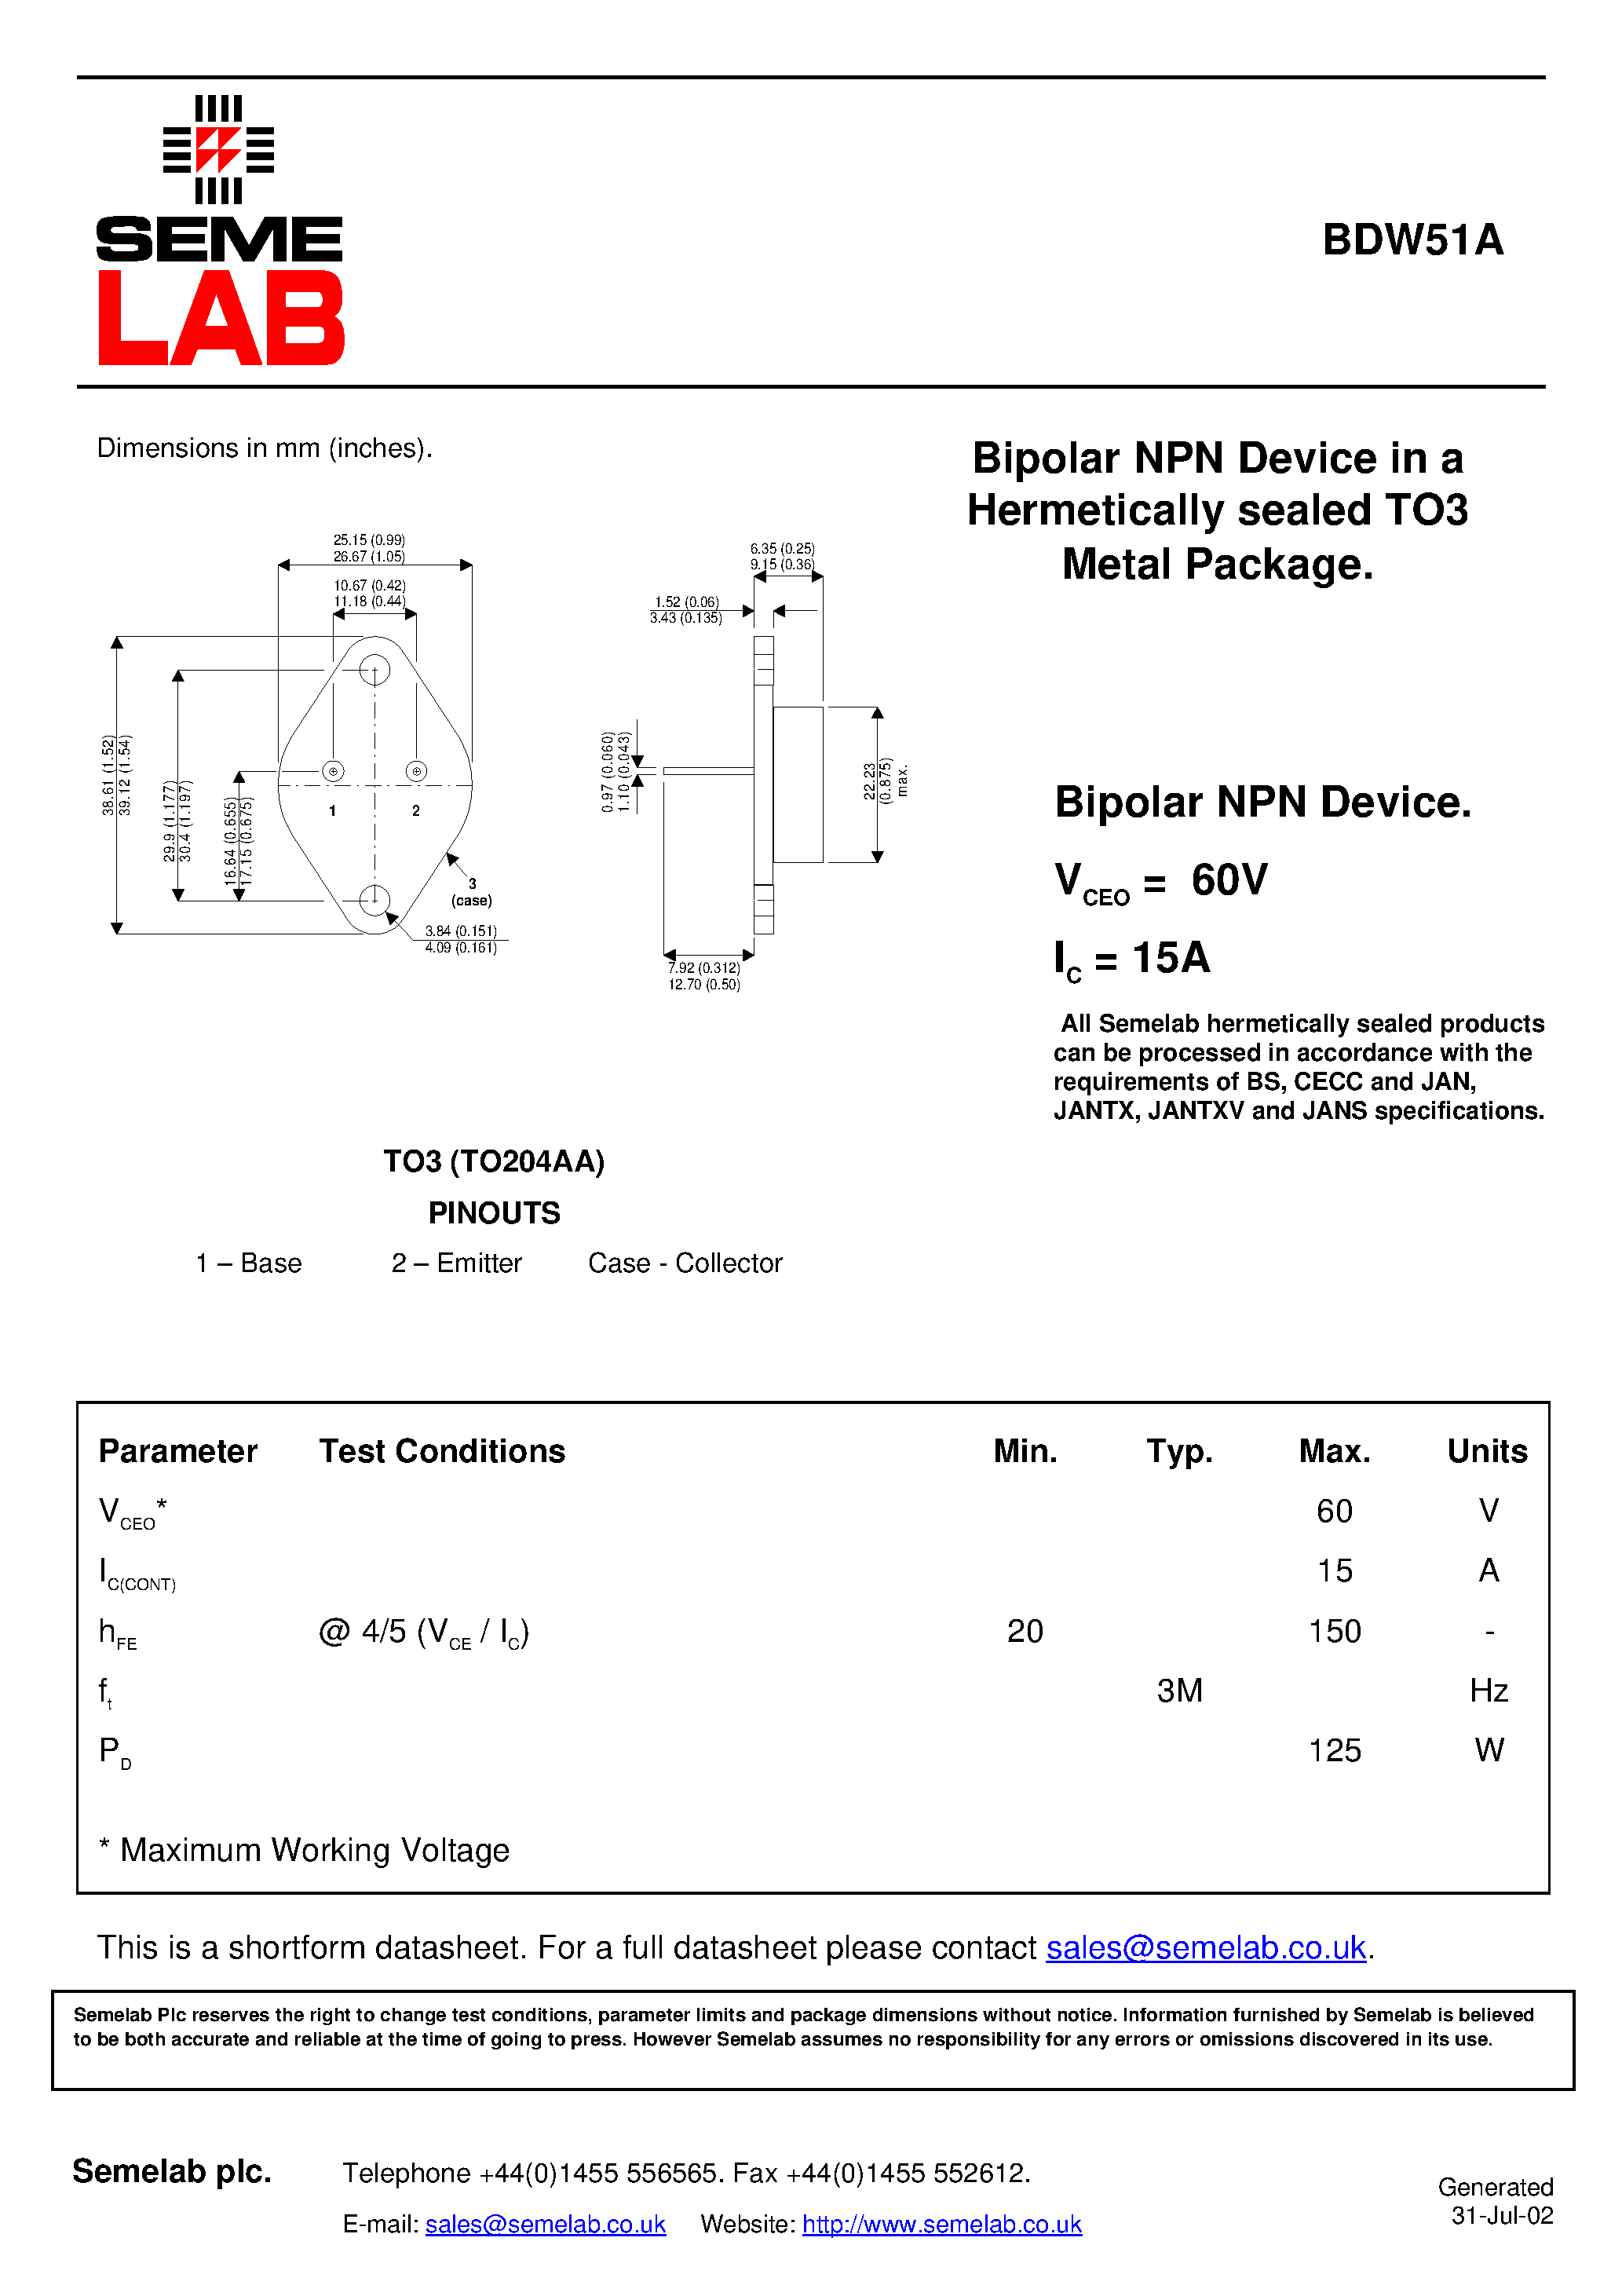 Datasheet BDW51A - Bipolar NPN Device in a Hermetically sealed TO3 Metal Package page 1